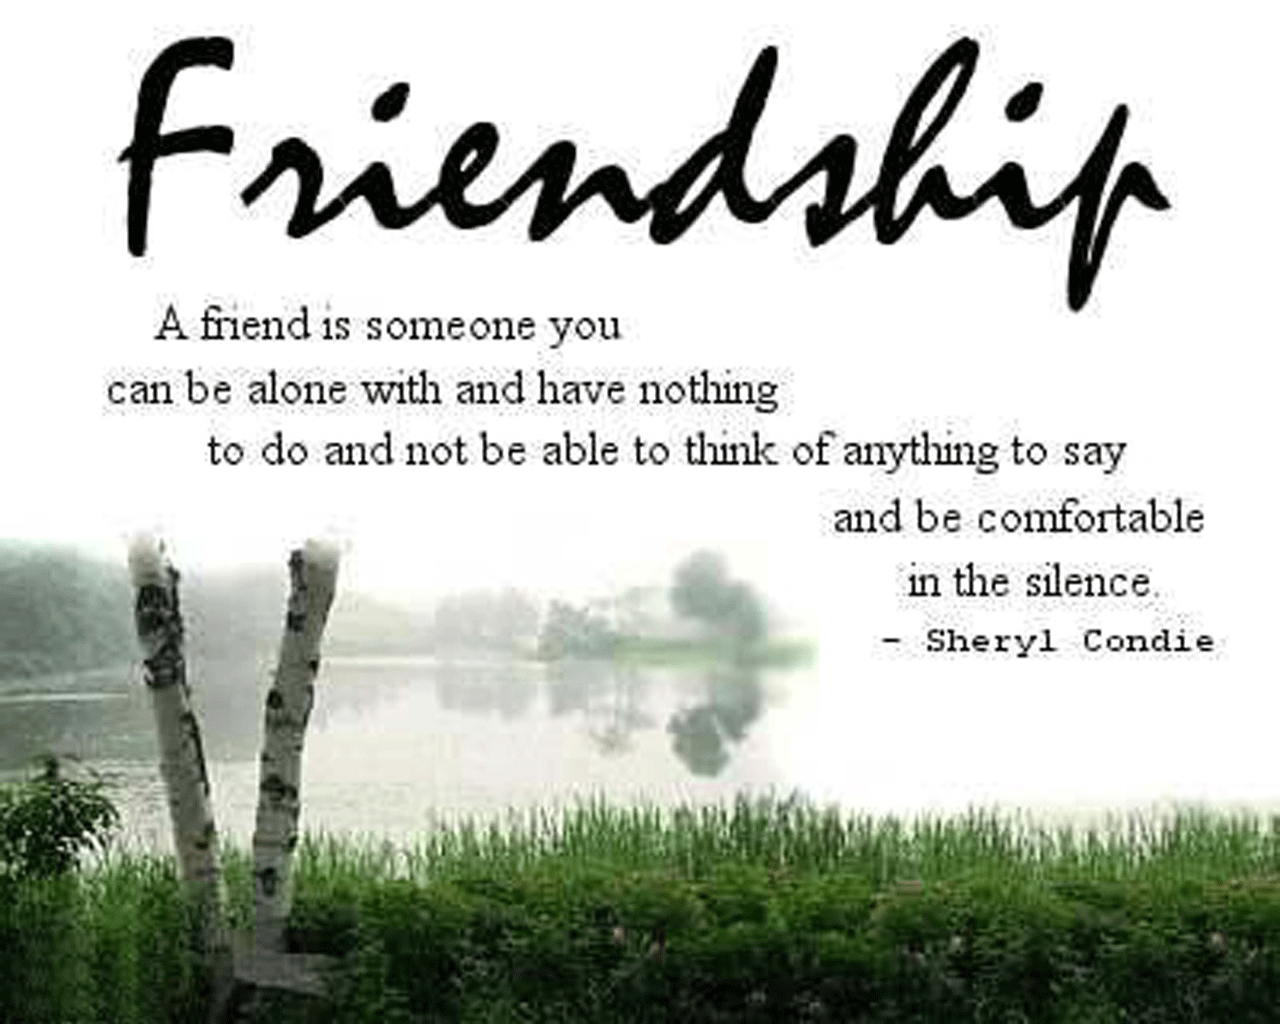 Best Friendship Quotes, Sayings, Image, Pics & Wallpaper